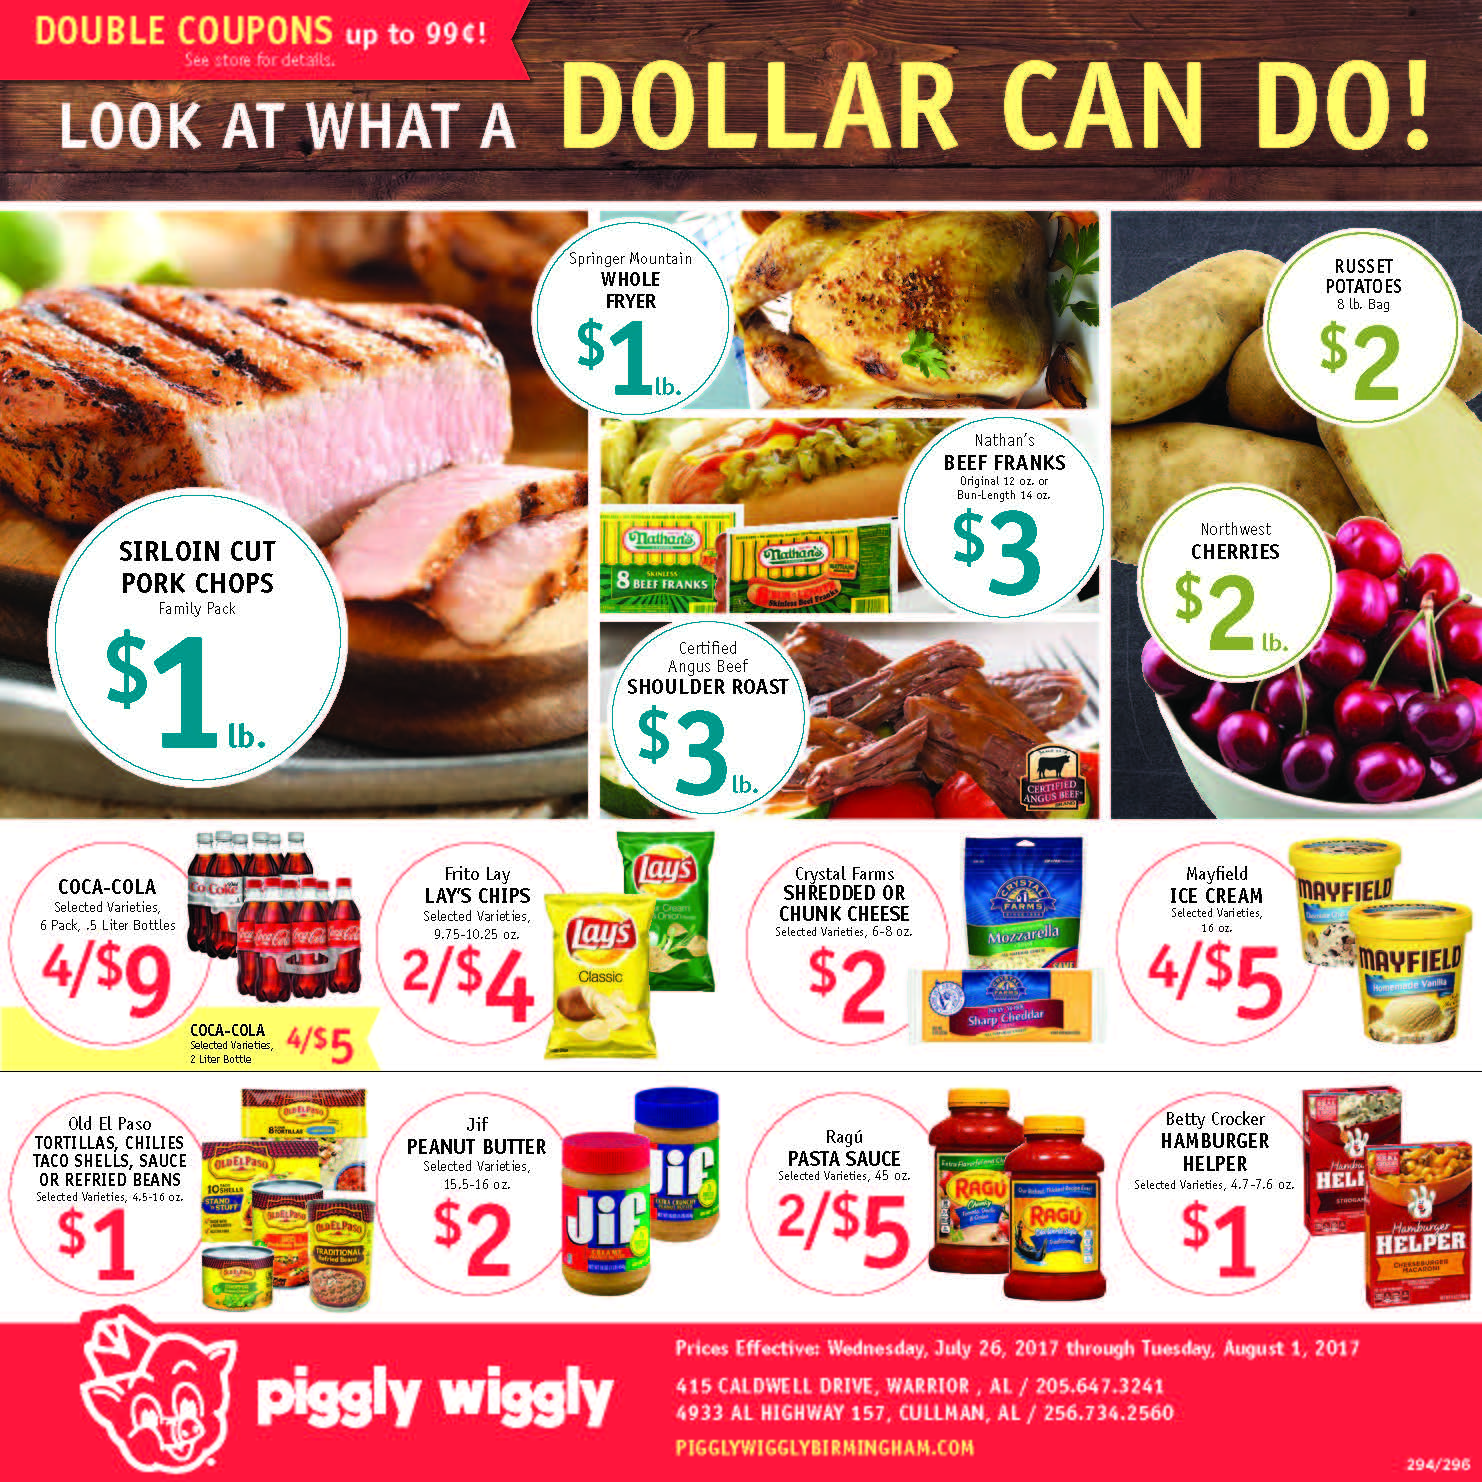 Weekly Ads - Piggly Wiggly Grocery Store Birmingham Al